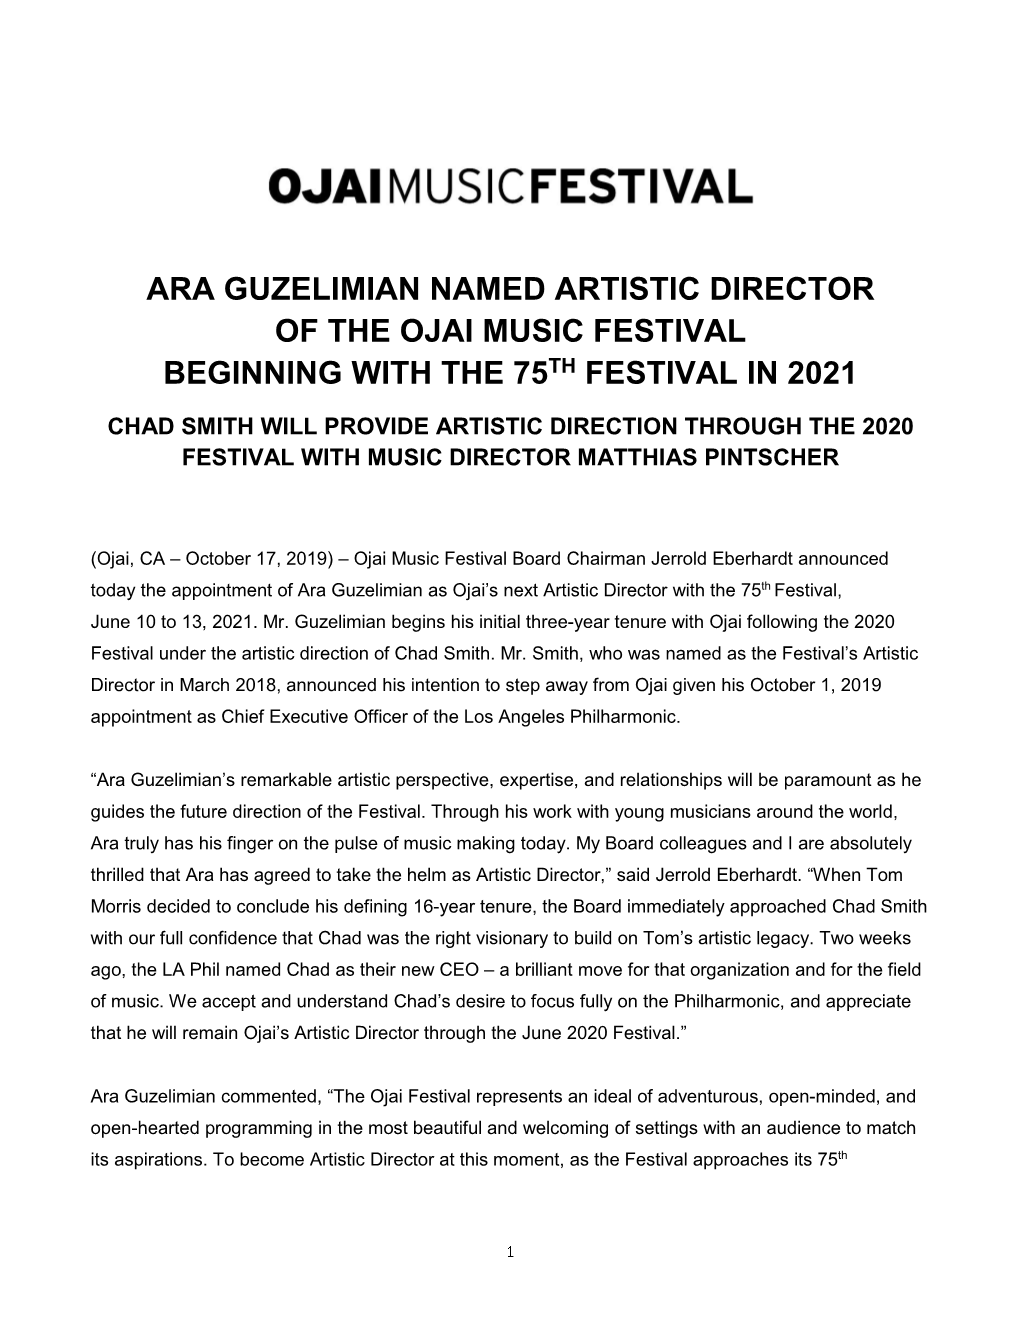 Ara Guzelimian Named Artistic Director of the Ojai Music Festival Beginning with the 75Th Festival in 2021